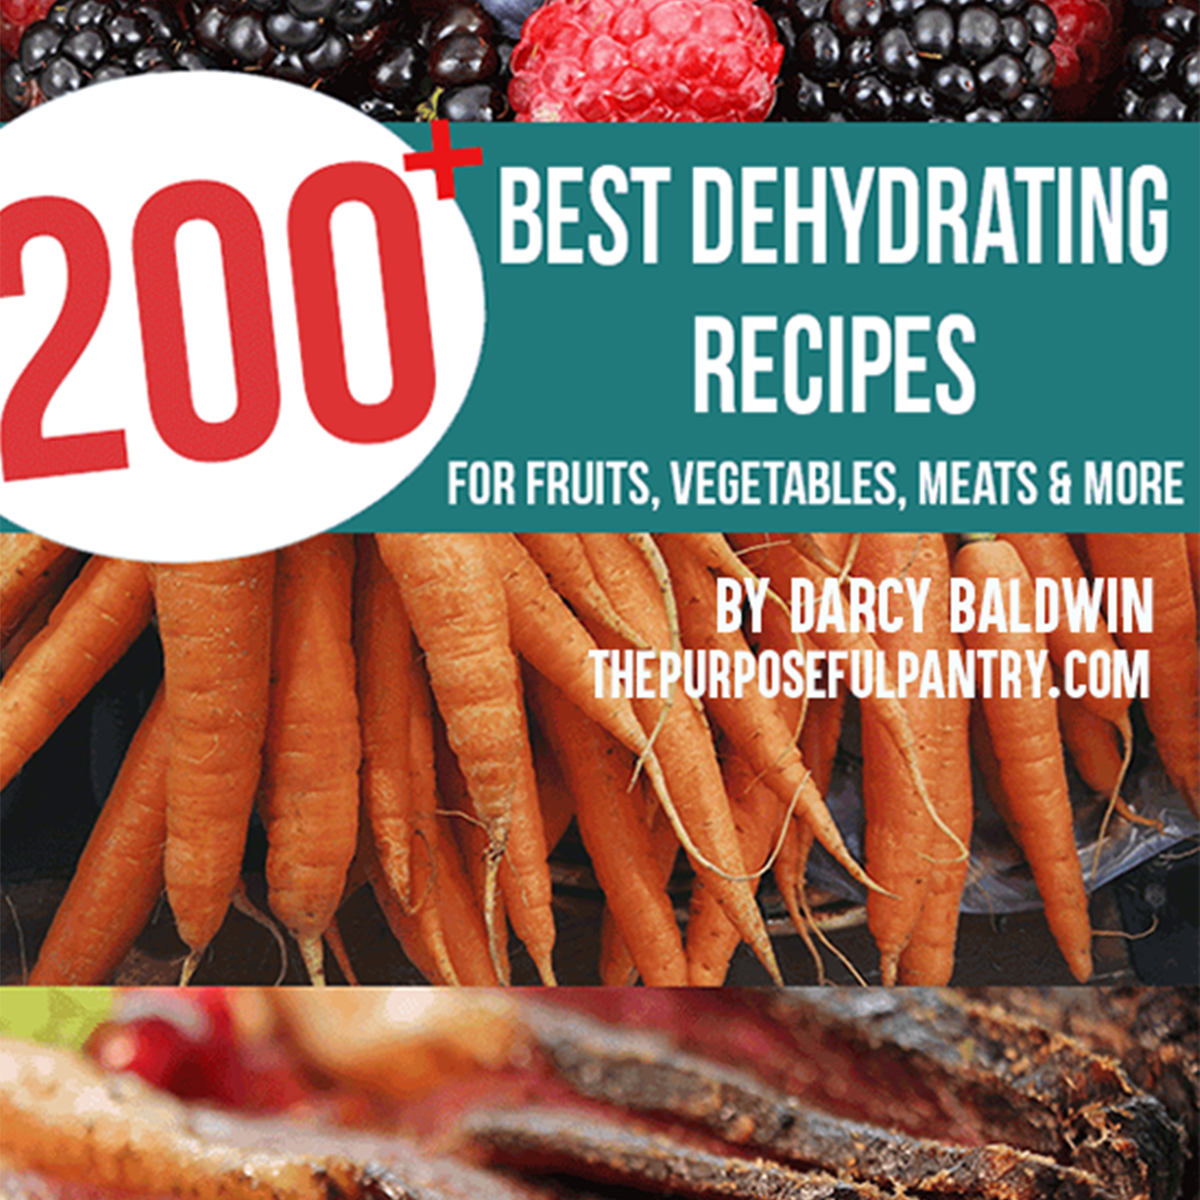 200 The Purposeful Pantry Best Dehydrating Recipes Guide for fruits, vegetables, meats and more.